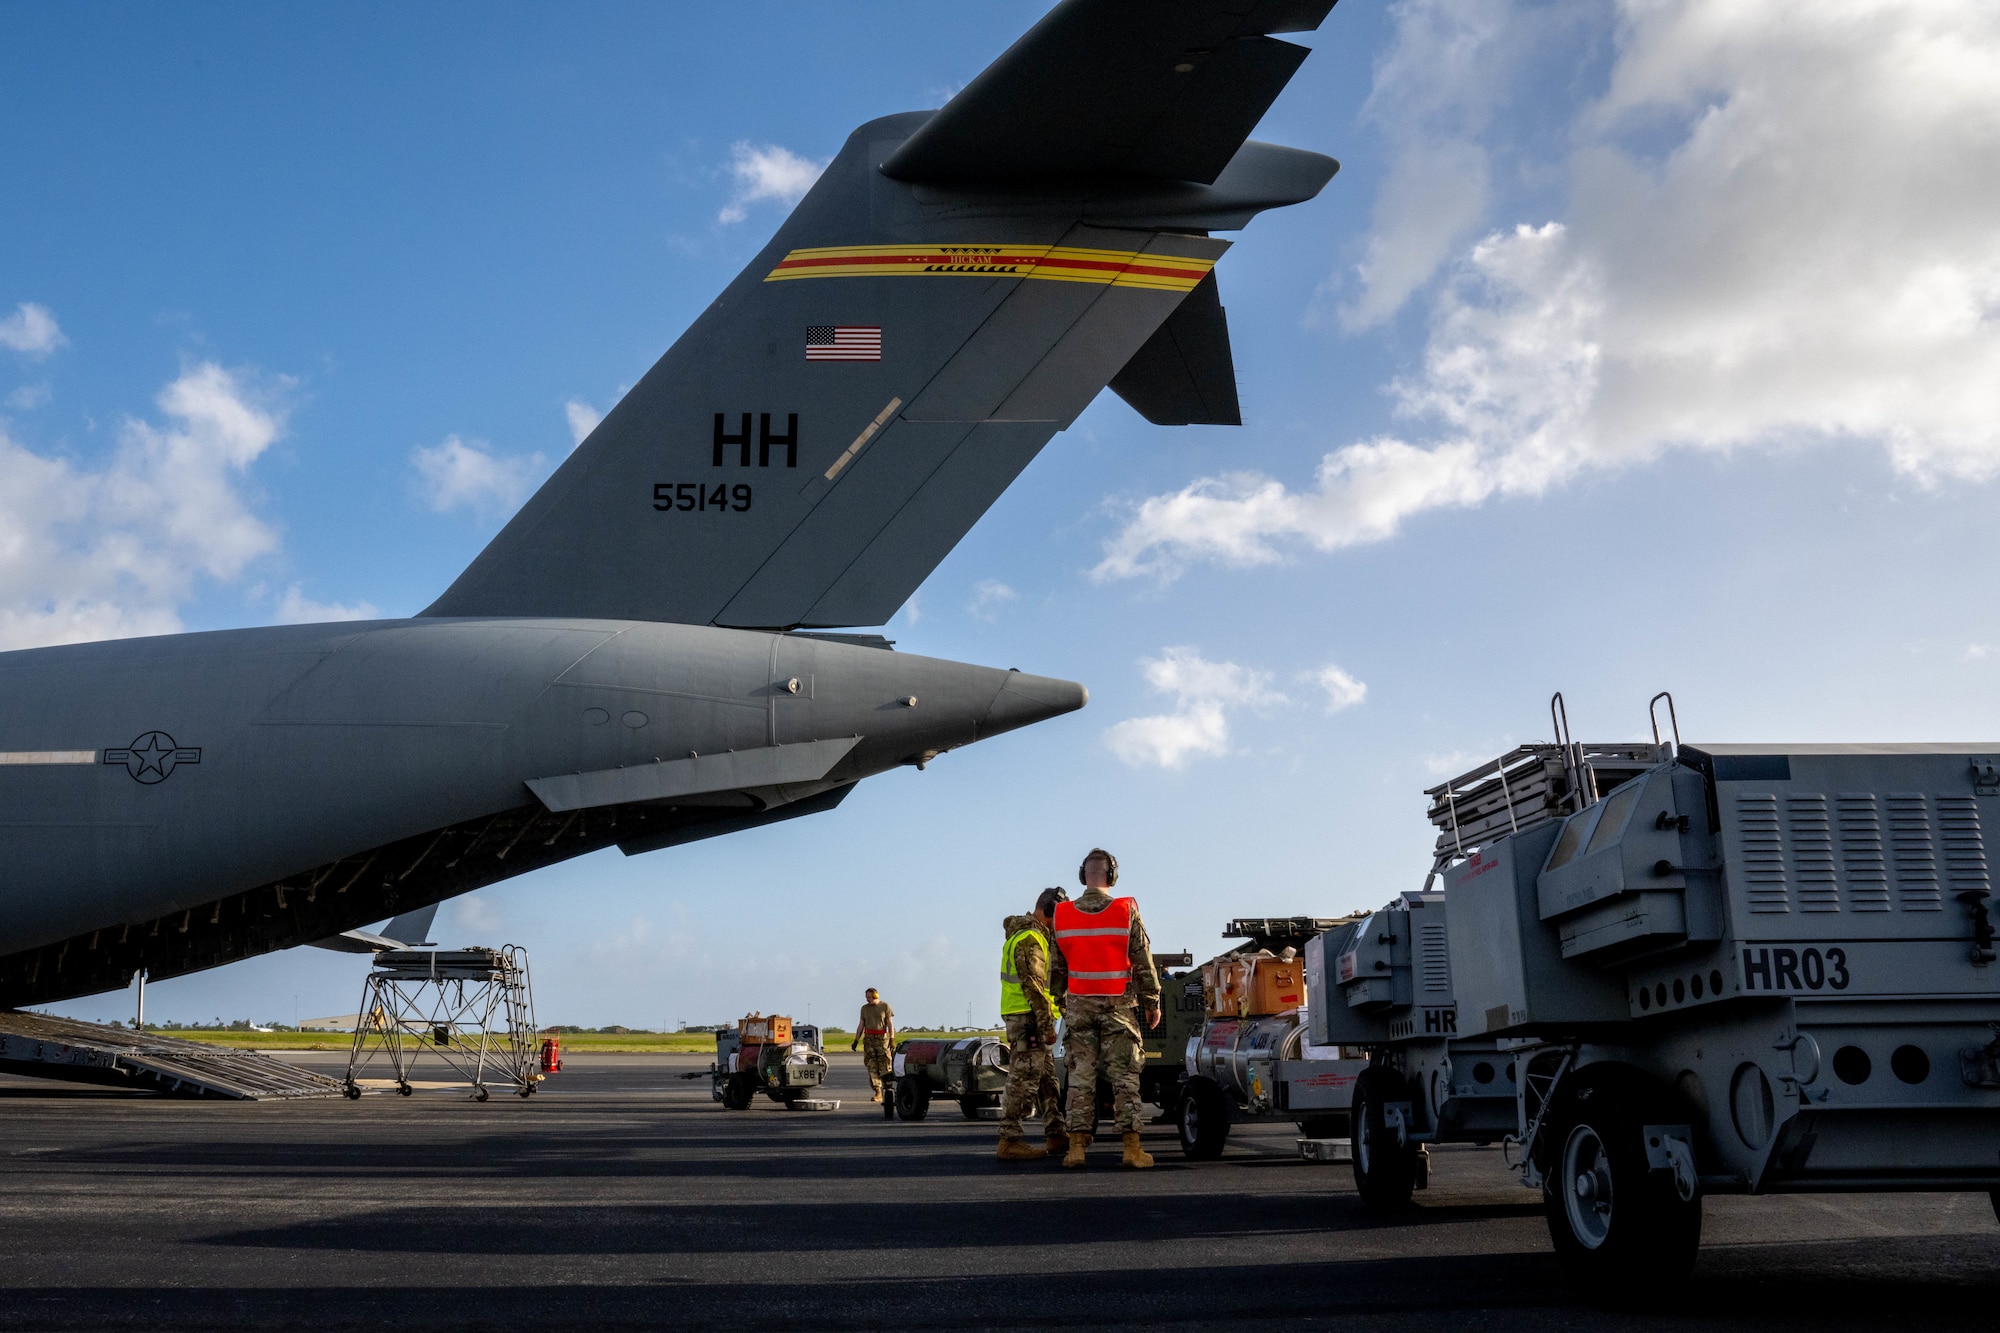 Airmen assigned to the 535th Airlift Squadron and the 735th Air Mobility Squadron load cargo on a C-17 Globemaster III at Joint Base Pearl Harbor-Hickam, Hawaii, during the Joint Base Readiness Exercise, March 1, 2023. The 15th Wing trains to operate, fight and advance its capabilities through realistic training exercises designed to test and develop joint logistics, resilience and rapid strategic mobility. (U.S. Air Force photo by Senior Airman Makensie Cooper)